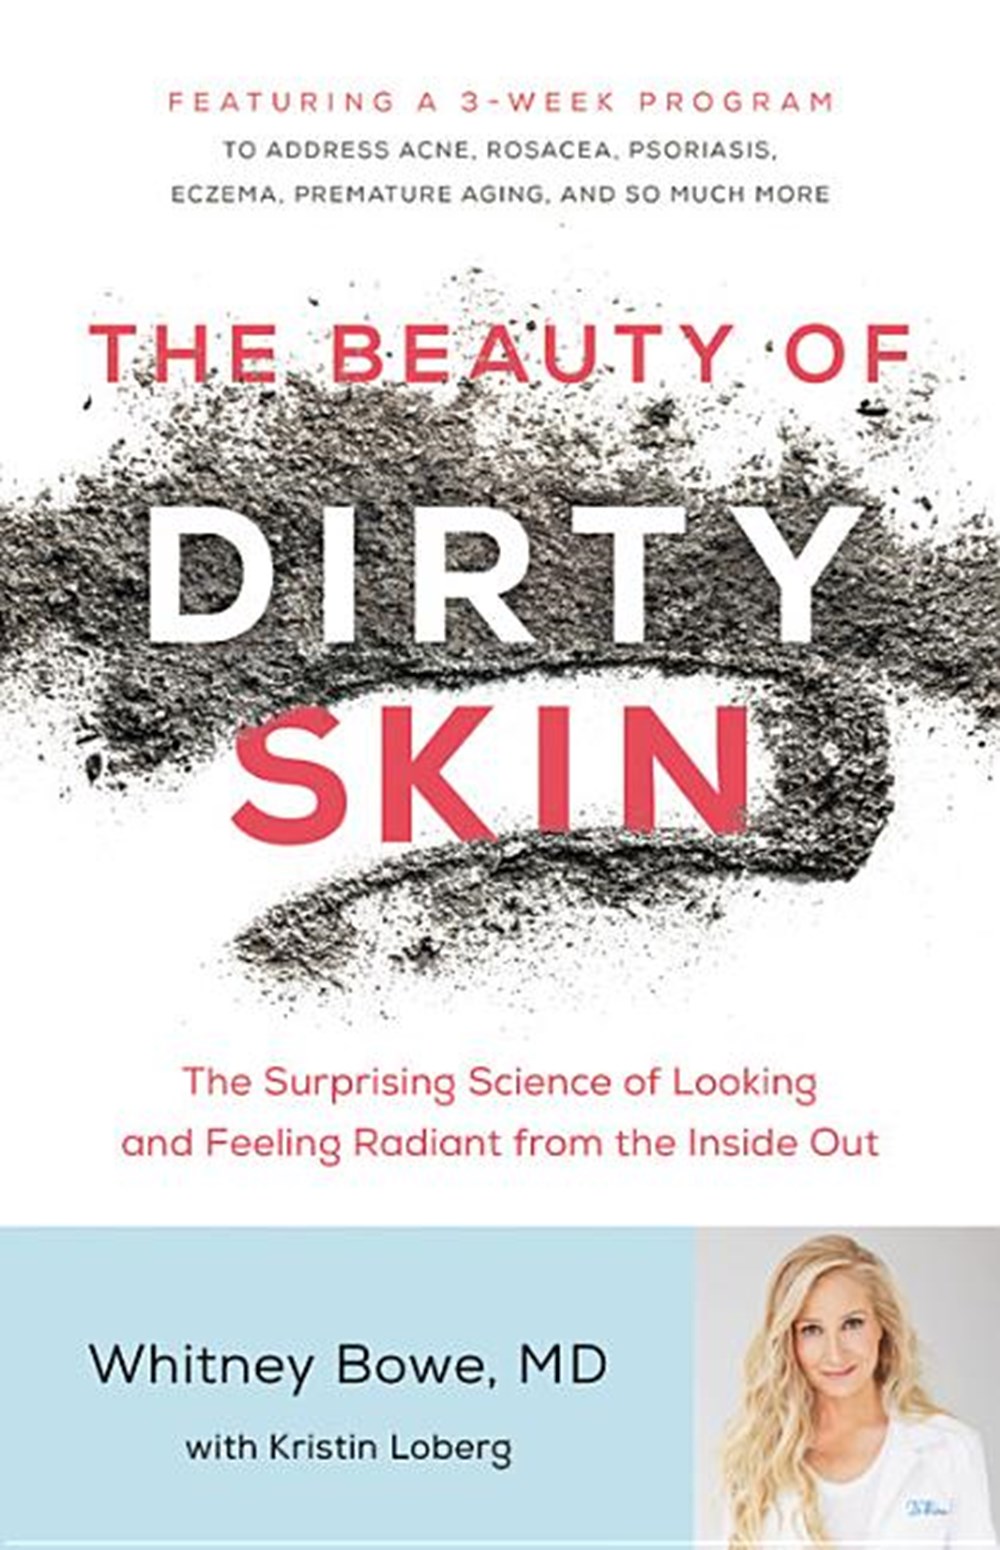 Beauty of Dirty Skin: The Surprising Science of Looking and Feeling Radiant from the Inside Out